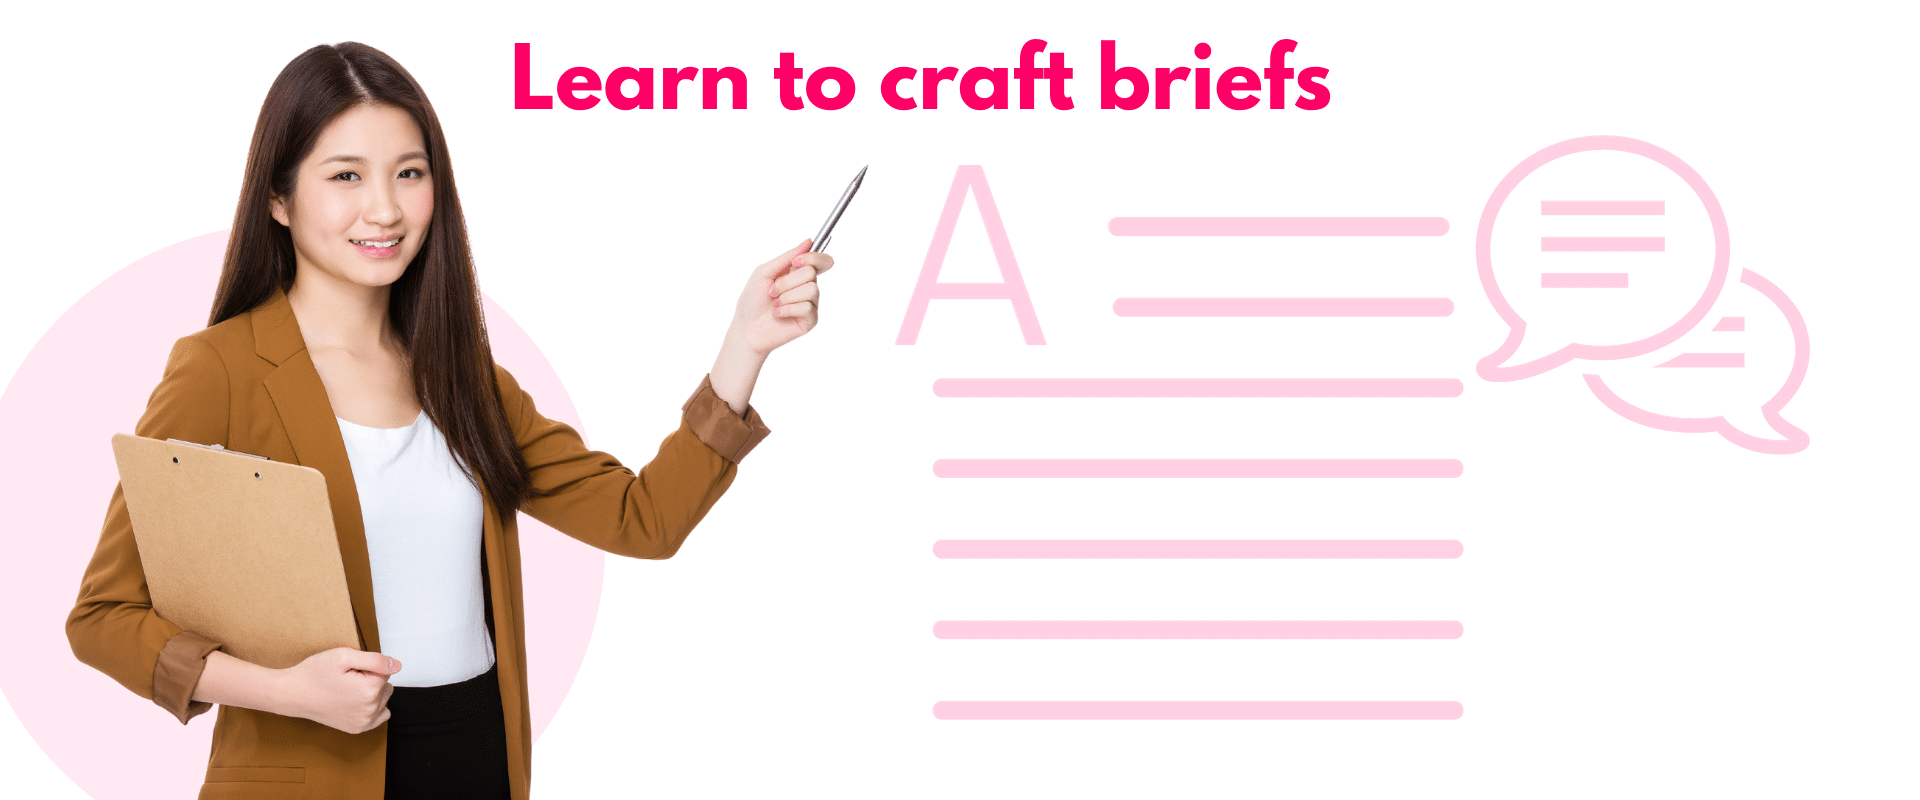 Learn to craft briefs.